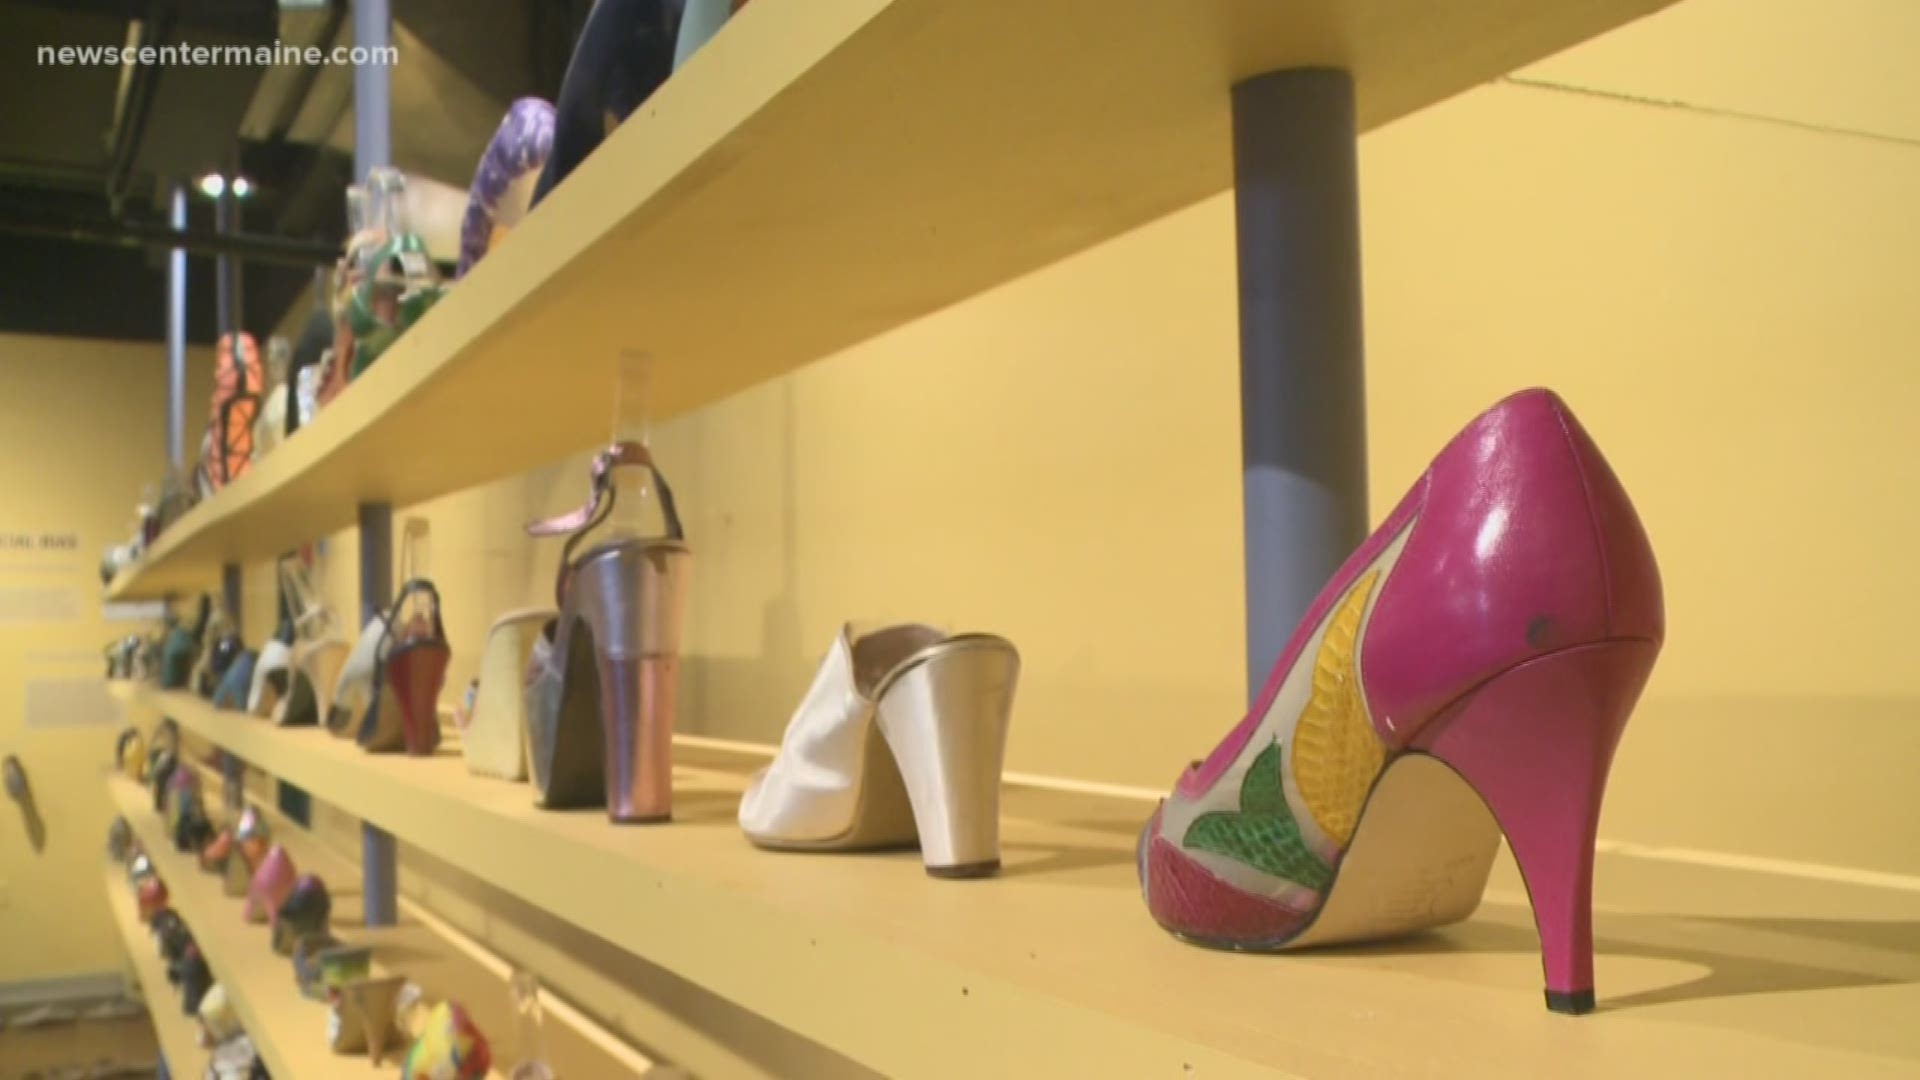 Christine McDowell has been collecting shoes since she was a child.